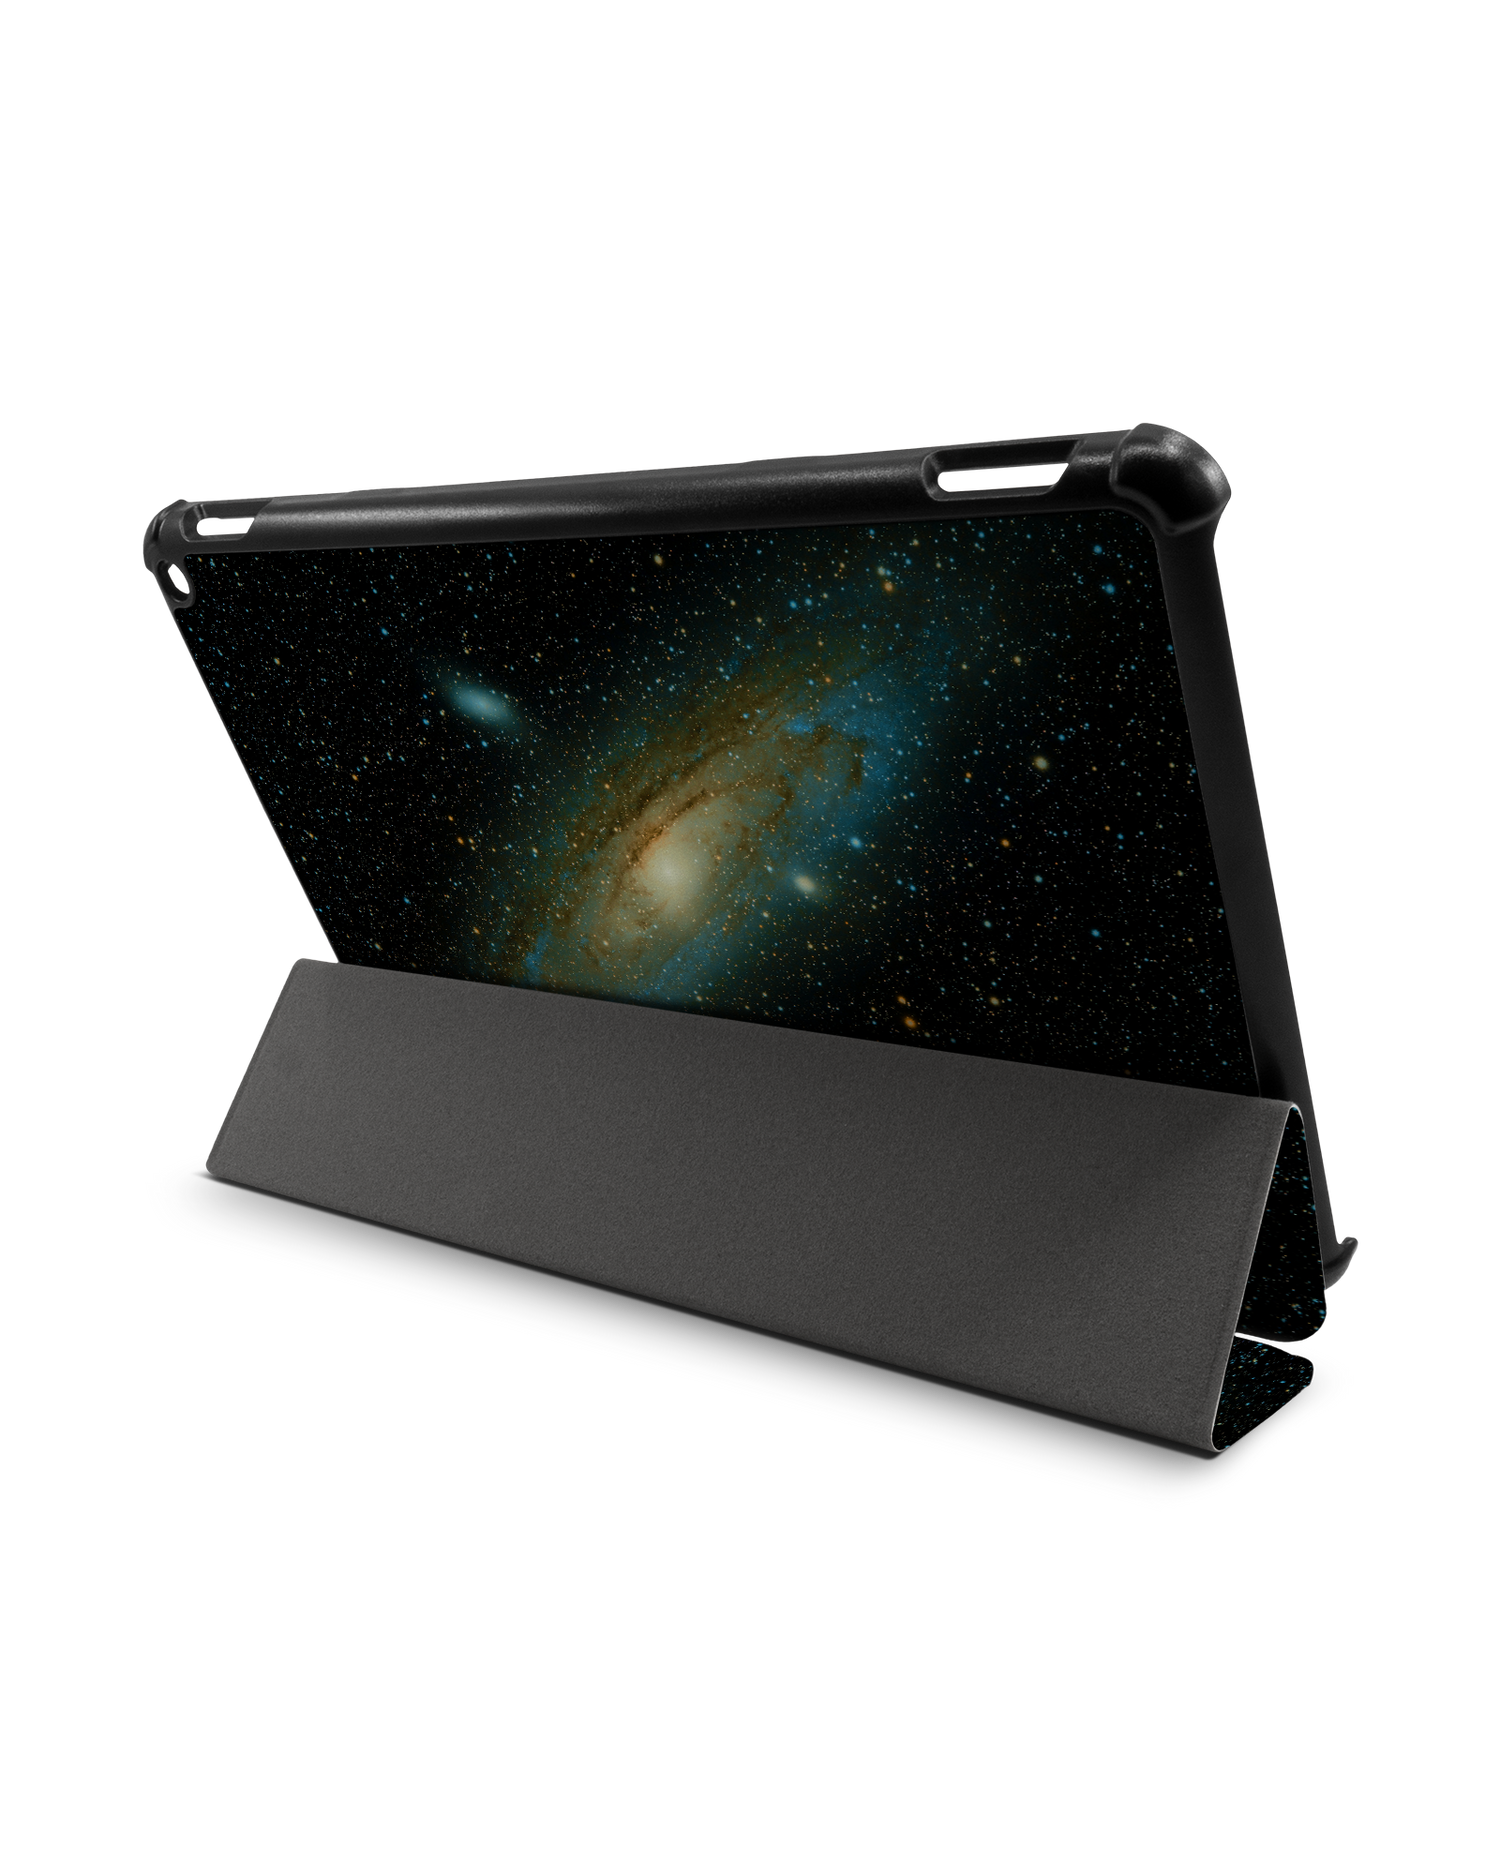 Outer Space Tablet Smart Case for Amazon Fire HD 10 (2021): Used as Stand